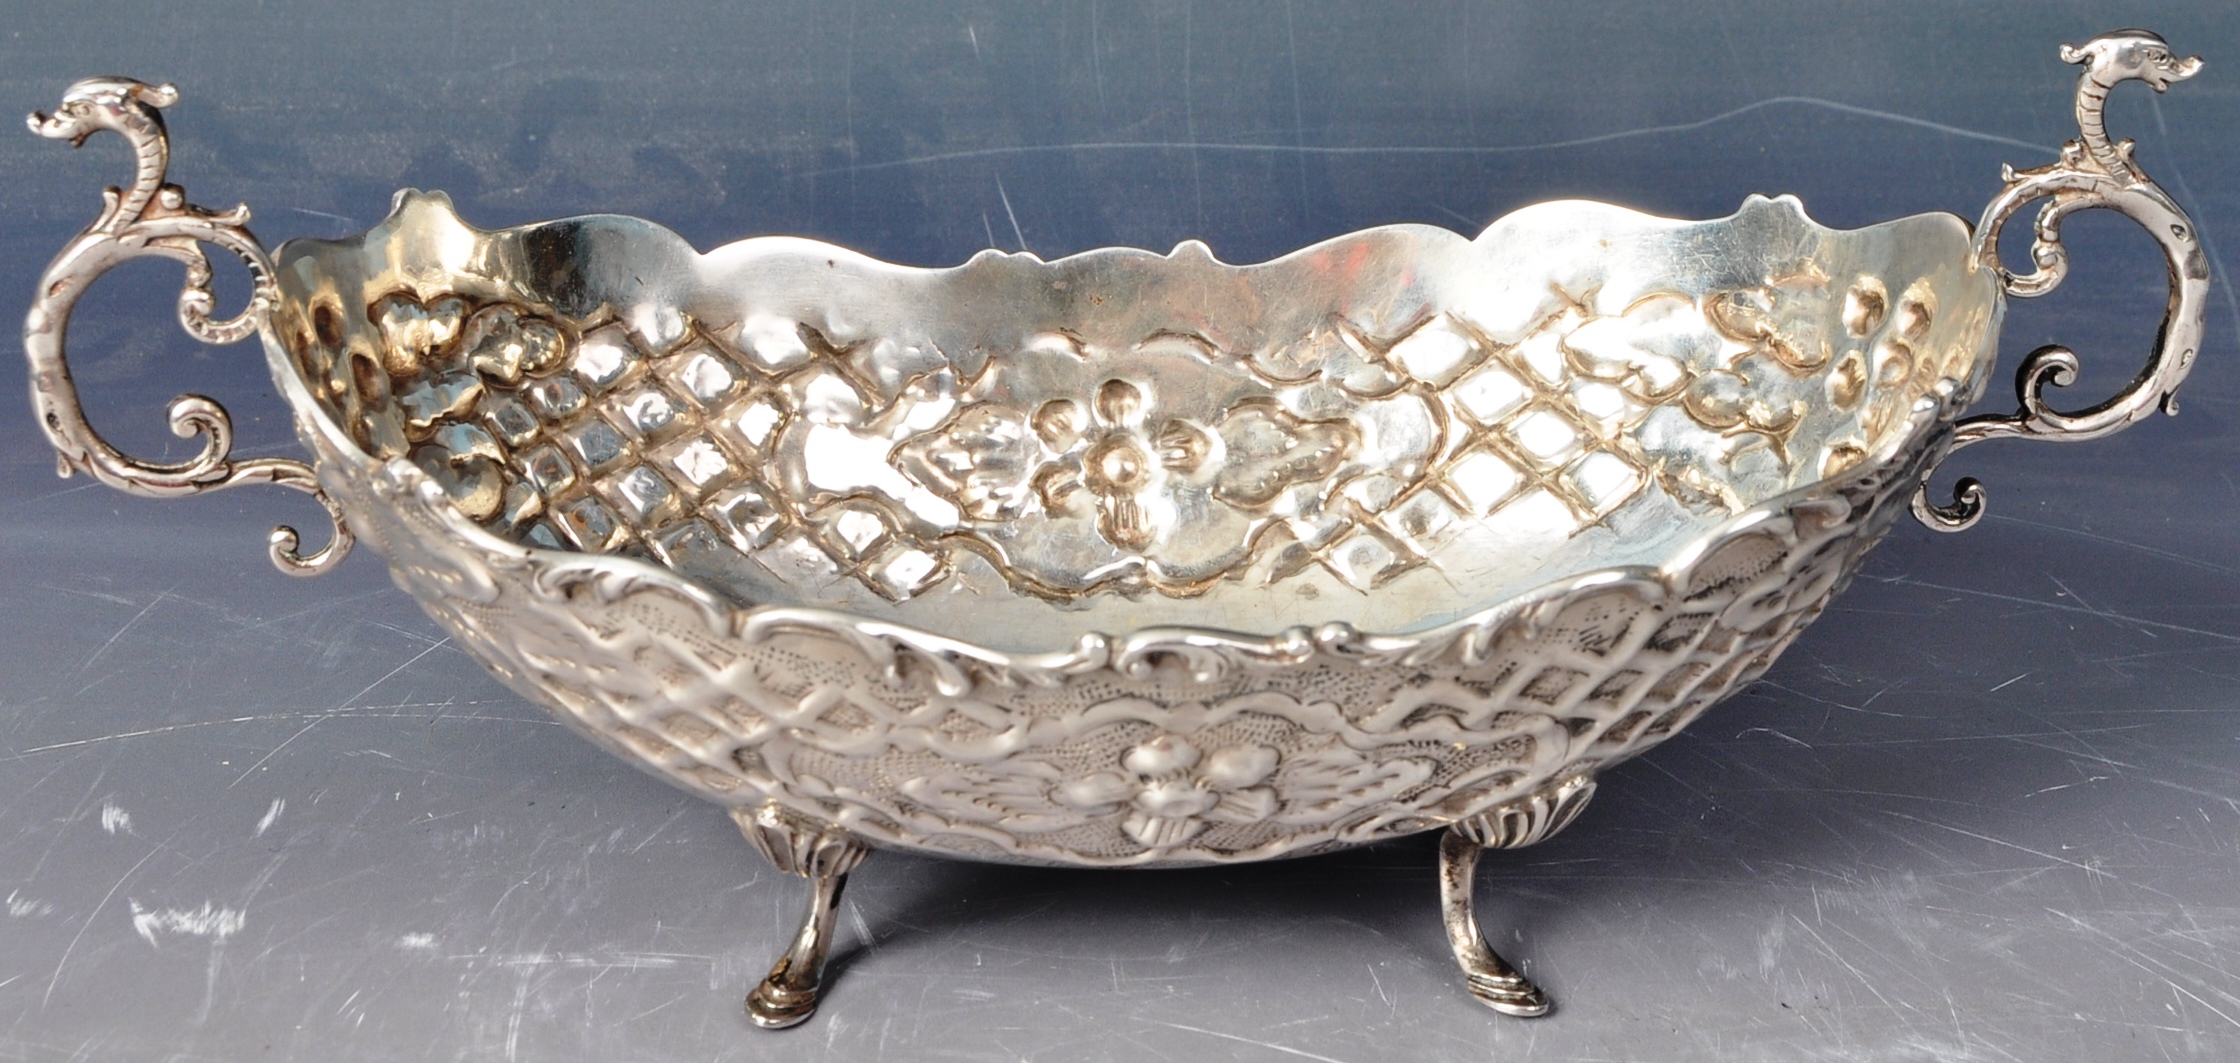 EARLY 20TH CENTURY DANISH SILVER CENTREPIECE BOWL - Image 2 of 7